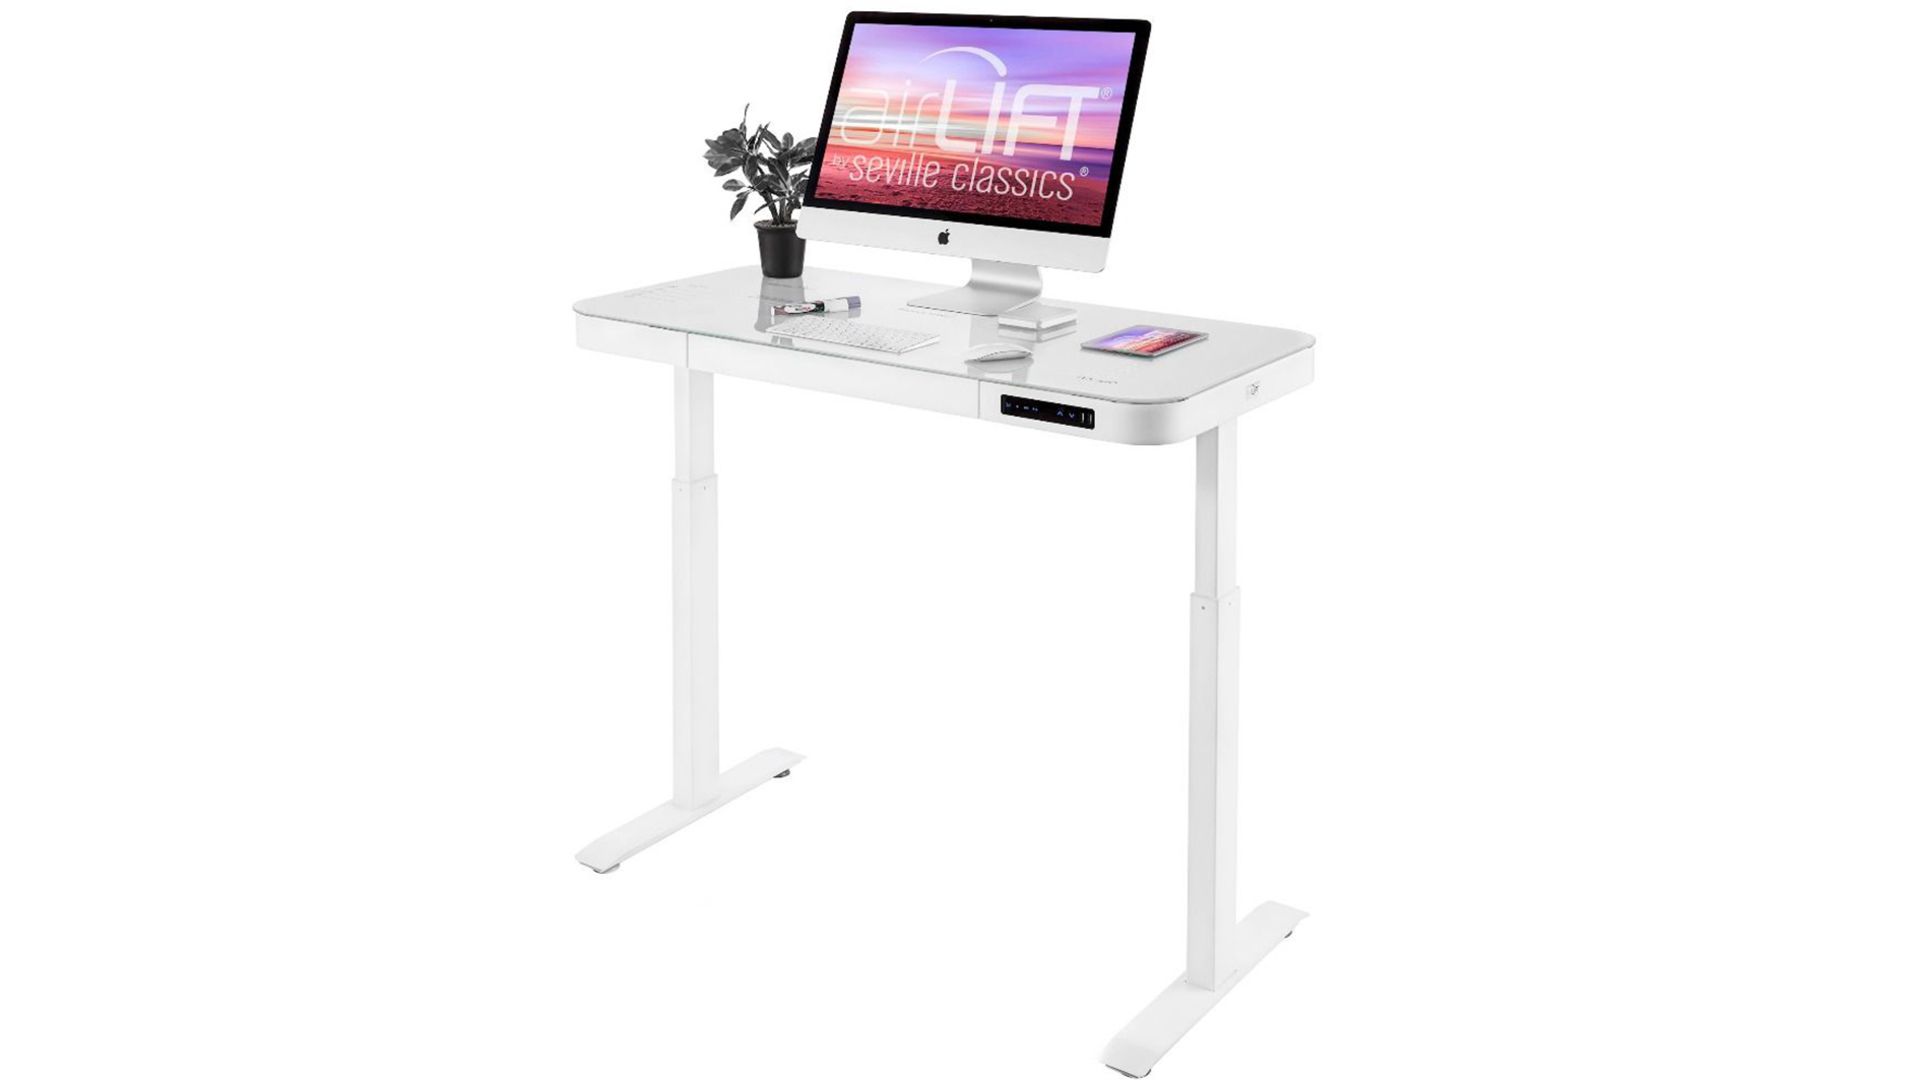 1 SEVILLE CLASSICS AIRLIFT PRO DUAL MOTORS TEMPERED GLASS ELECTRIC STANDING DESK WITH DRAWER, DUAL